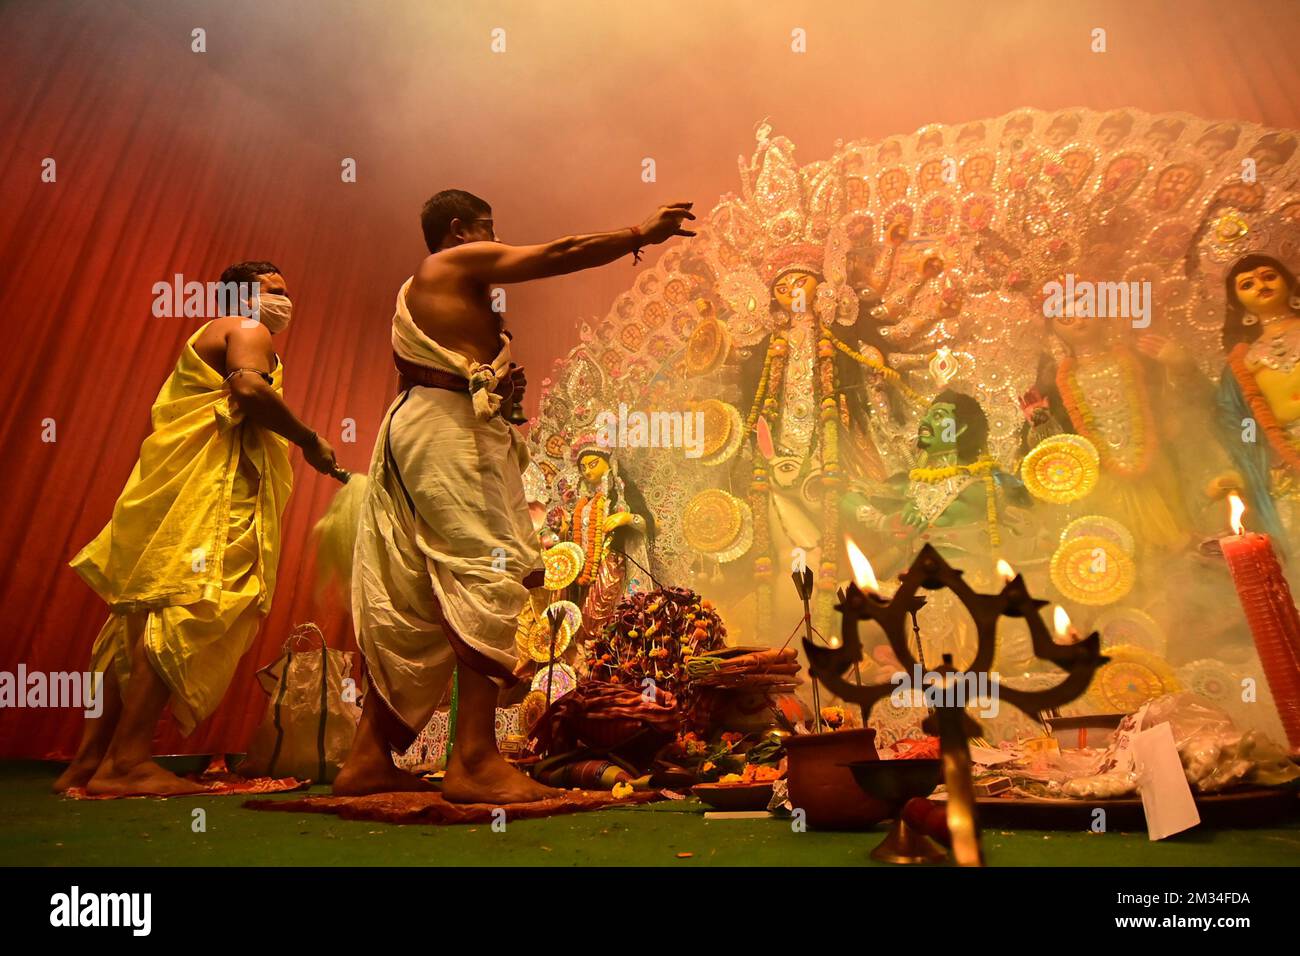 Howrah, West Bengal, India - 13th October 2021 : Goddess Durga is being worshipped by Hindu priests with holy panchapradip, in forground, during ashta Stock Photo